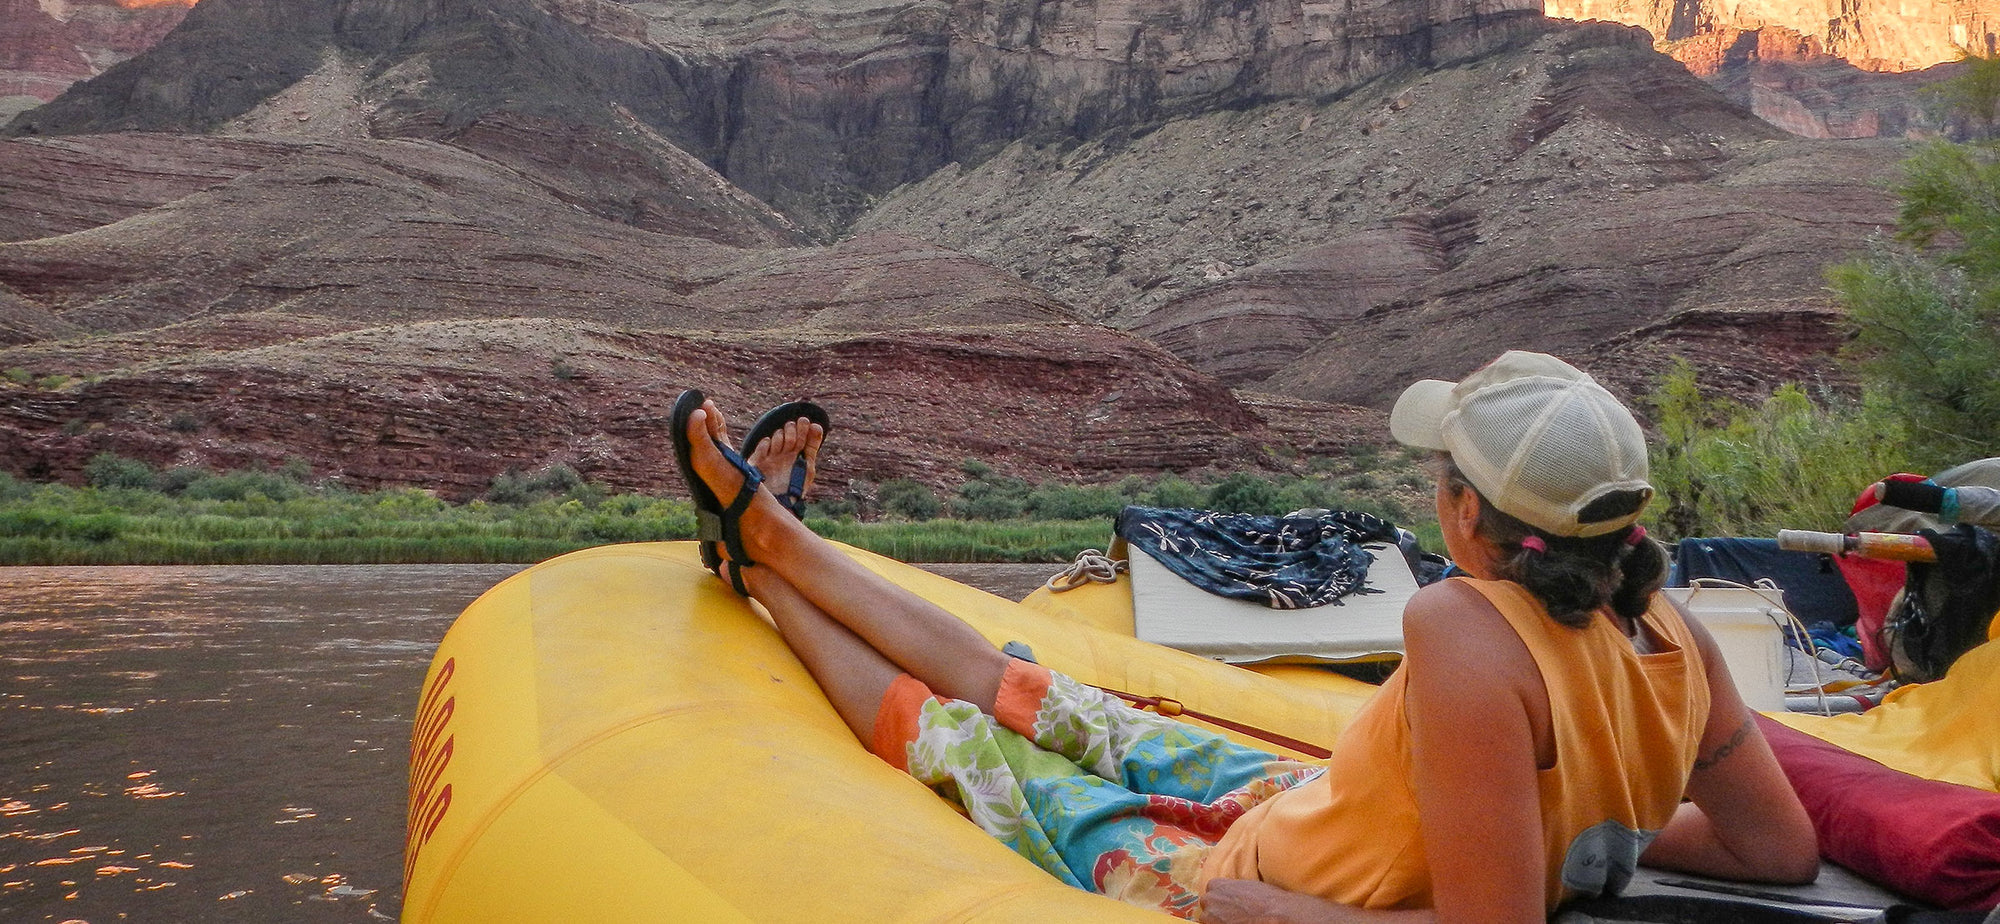 Grand Canyon Guide wearing trusty adventure sandals relaxing on a whitewater raft